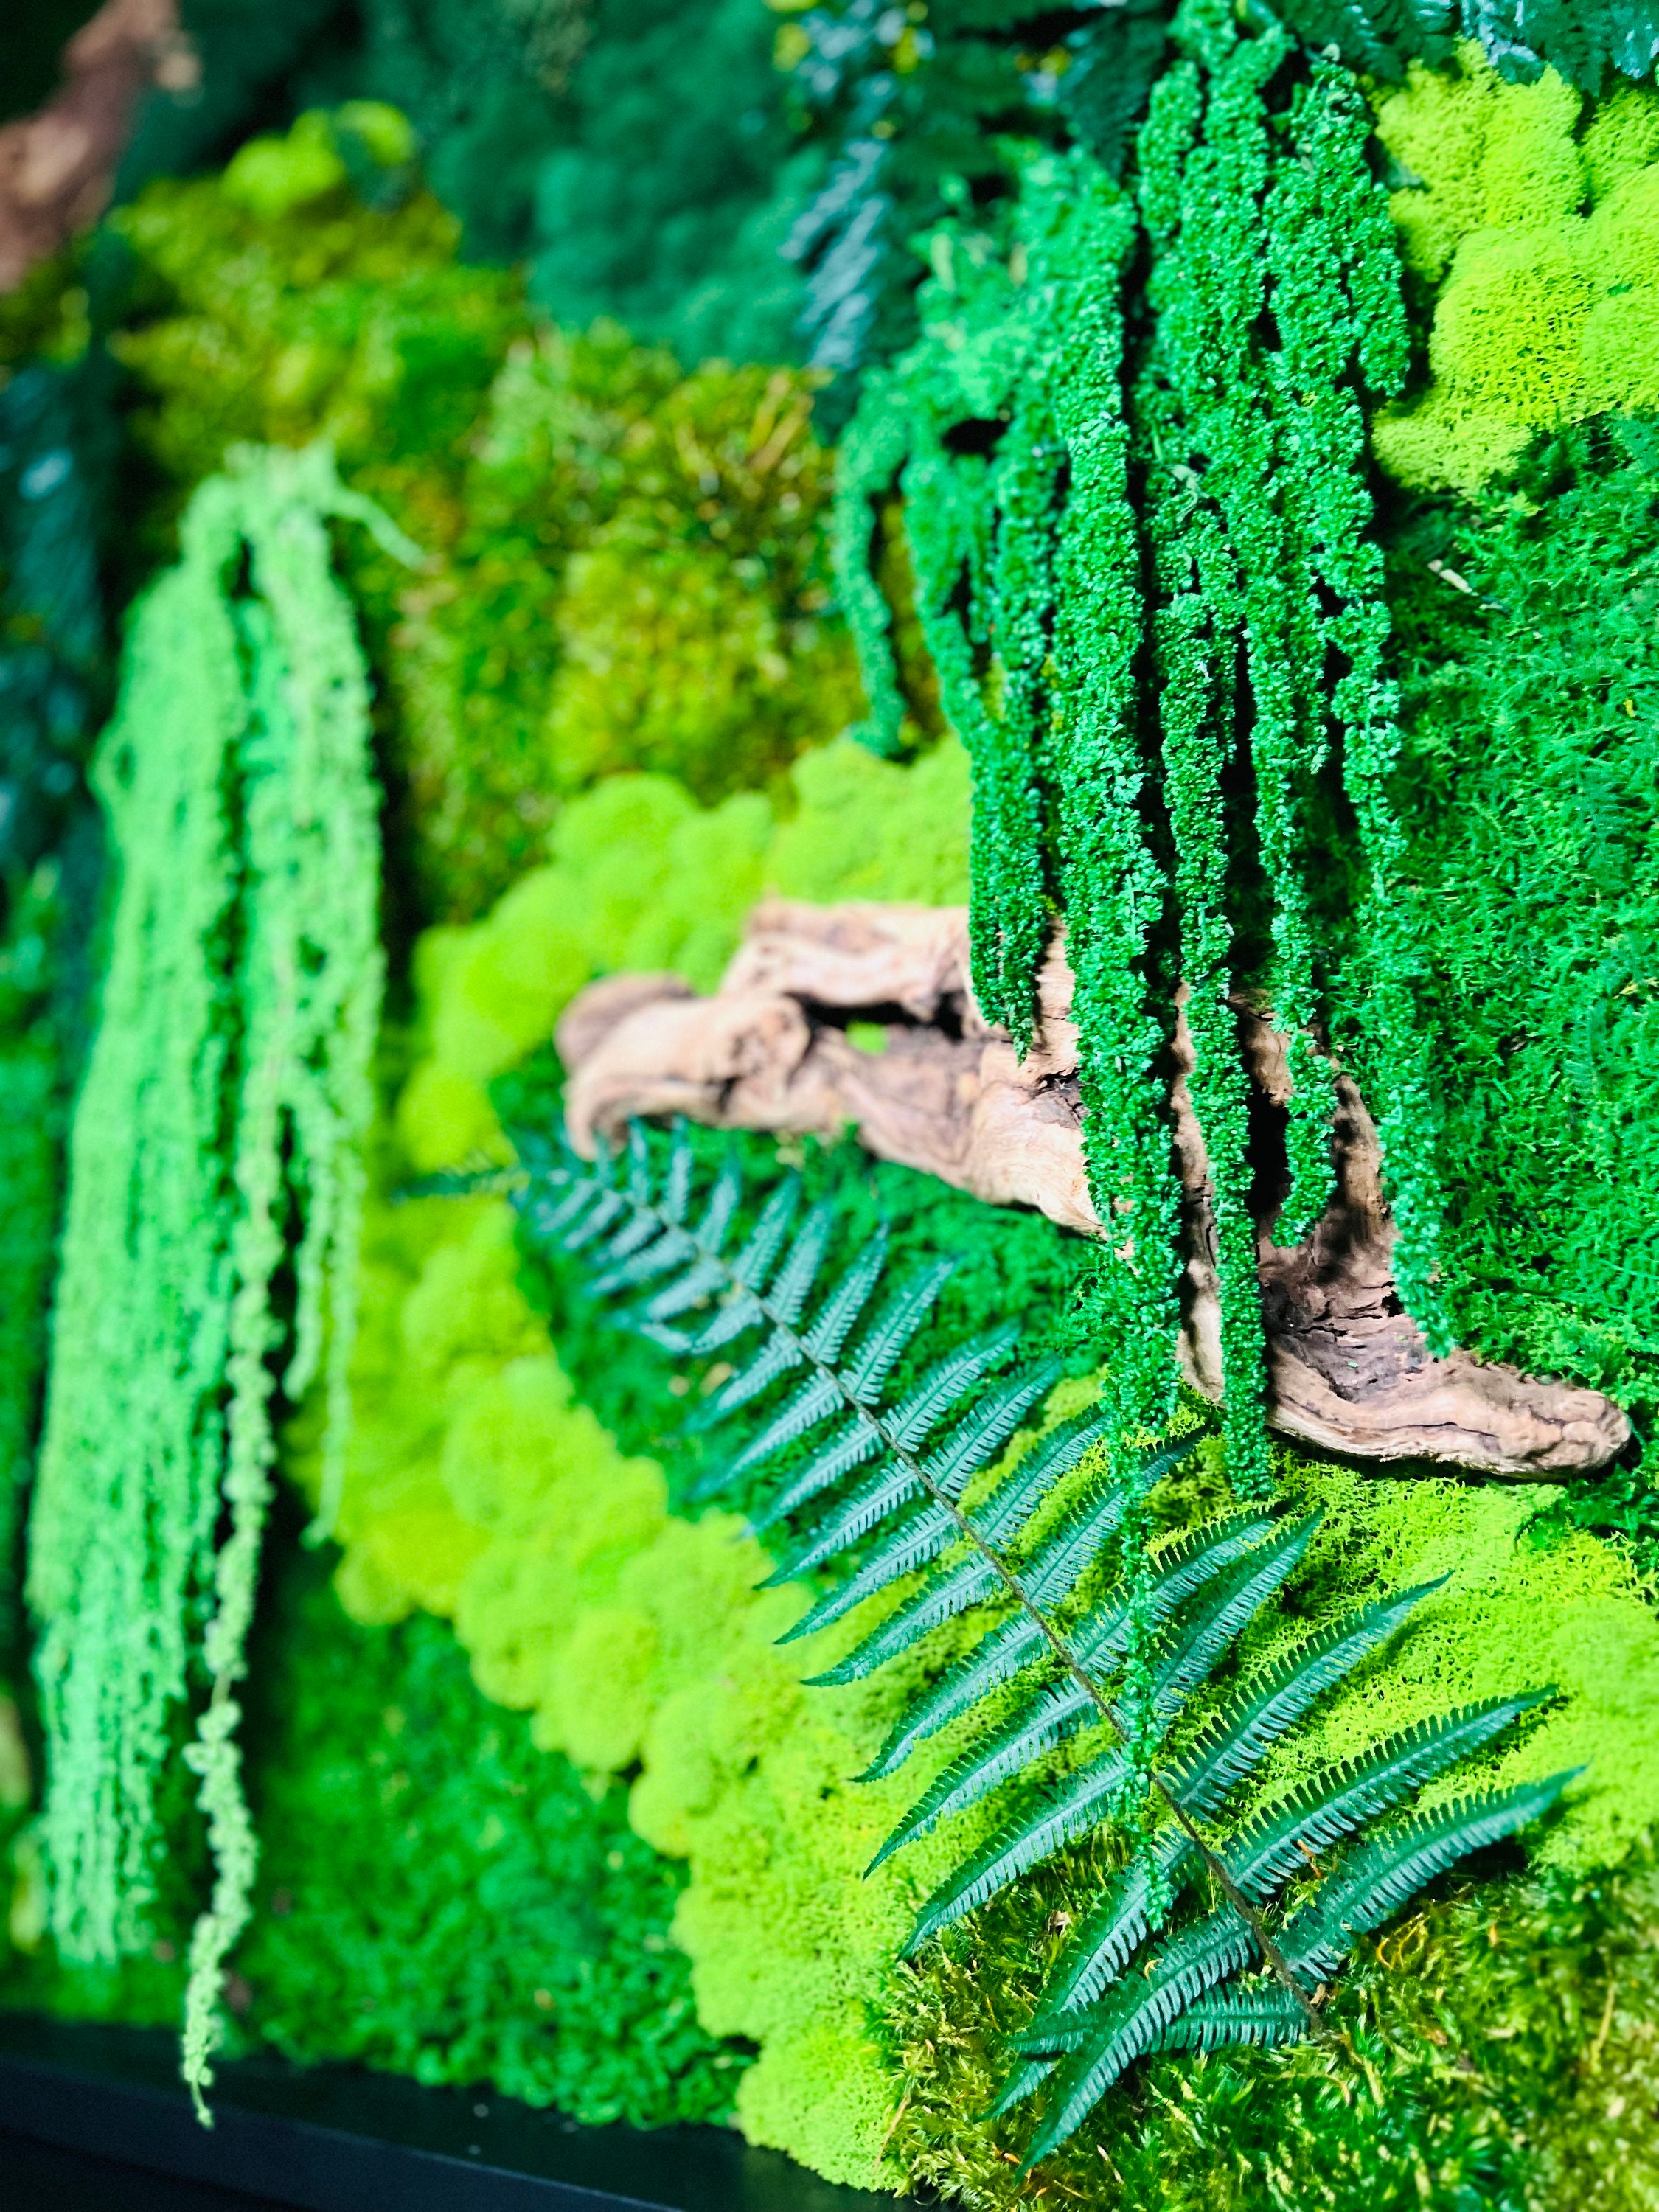 Entweg - Preserved Moss,Preserved Moss Wall Decor Real Preserved